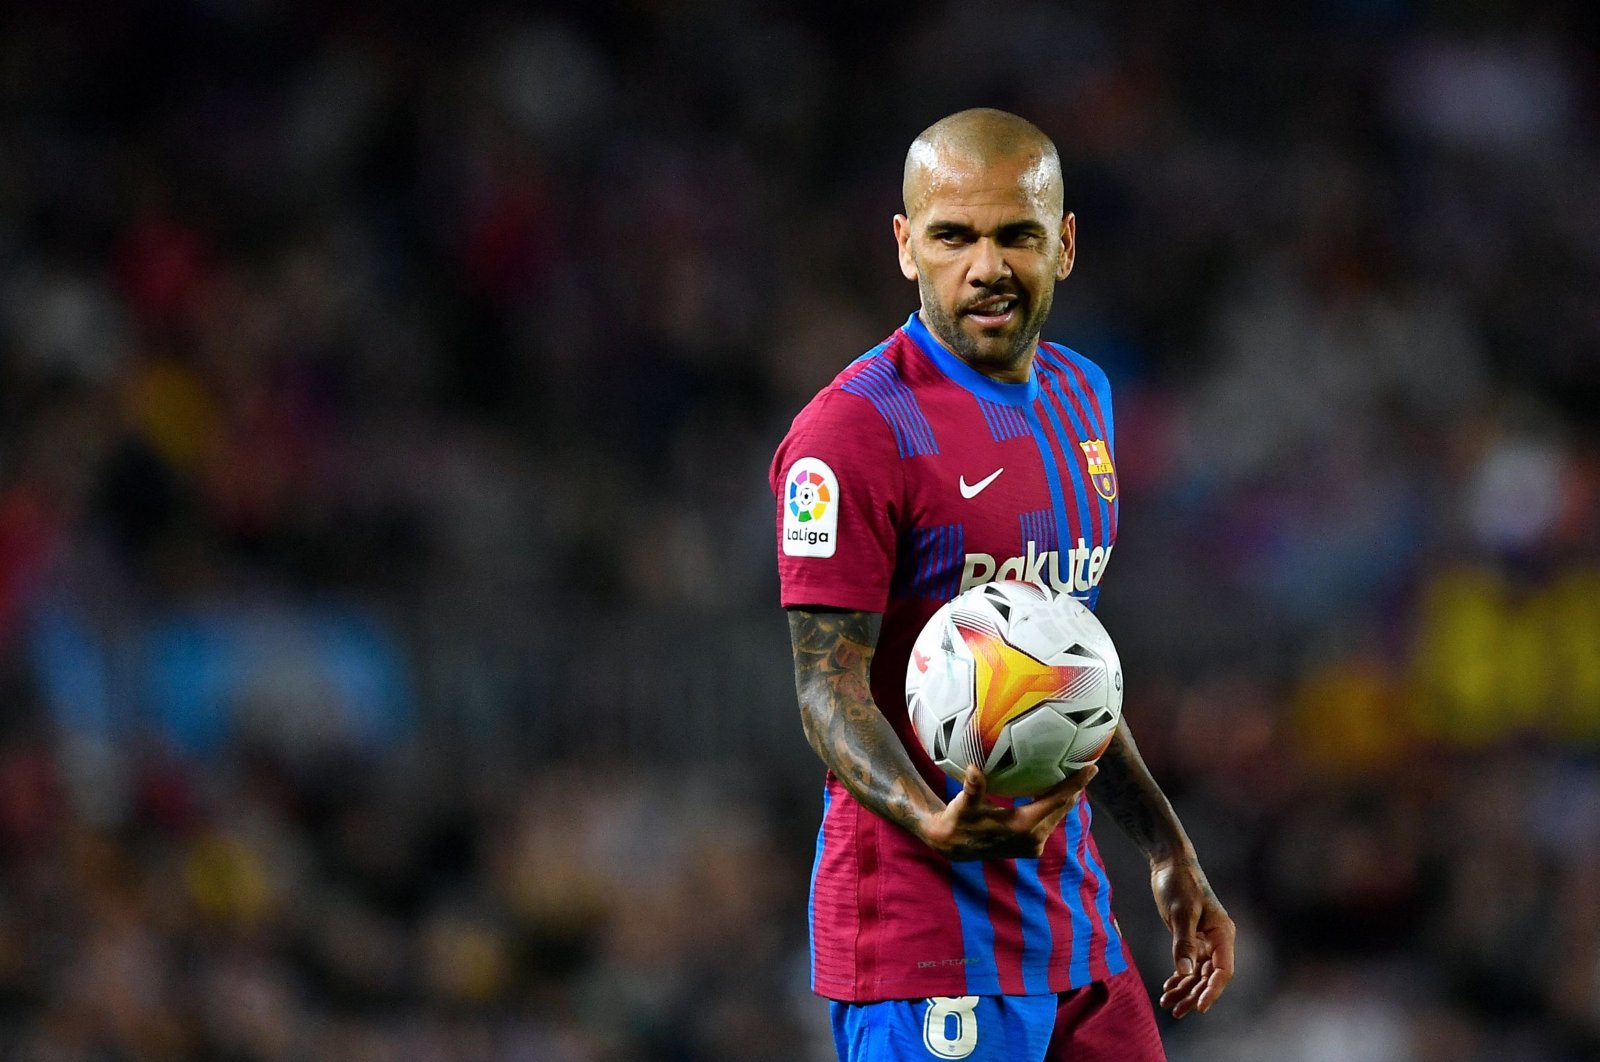 Dani Alves granted conditional release after assault conviction